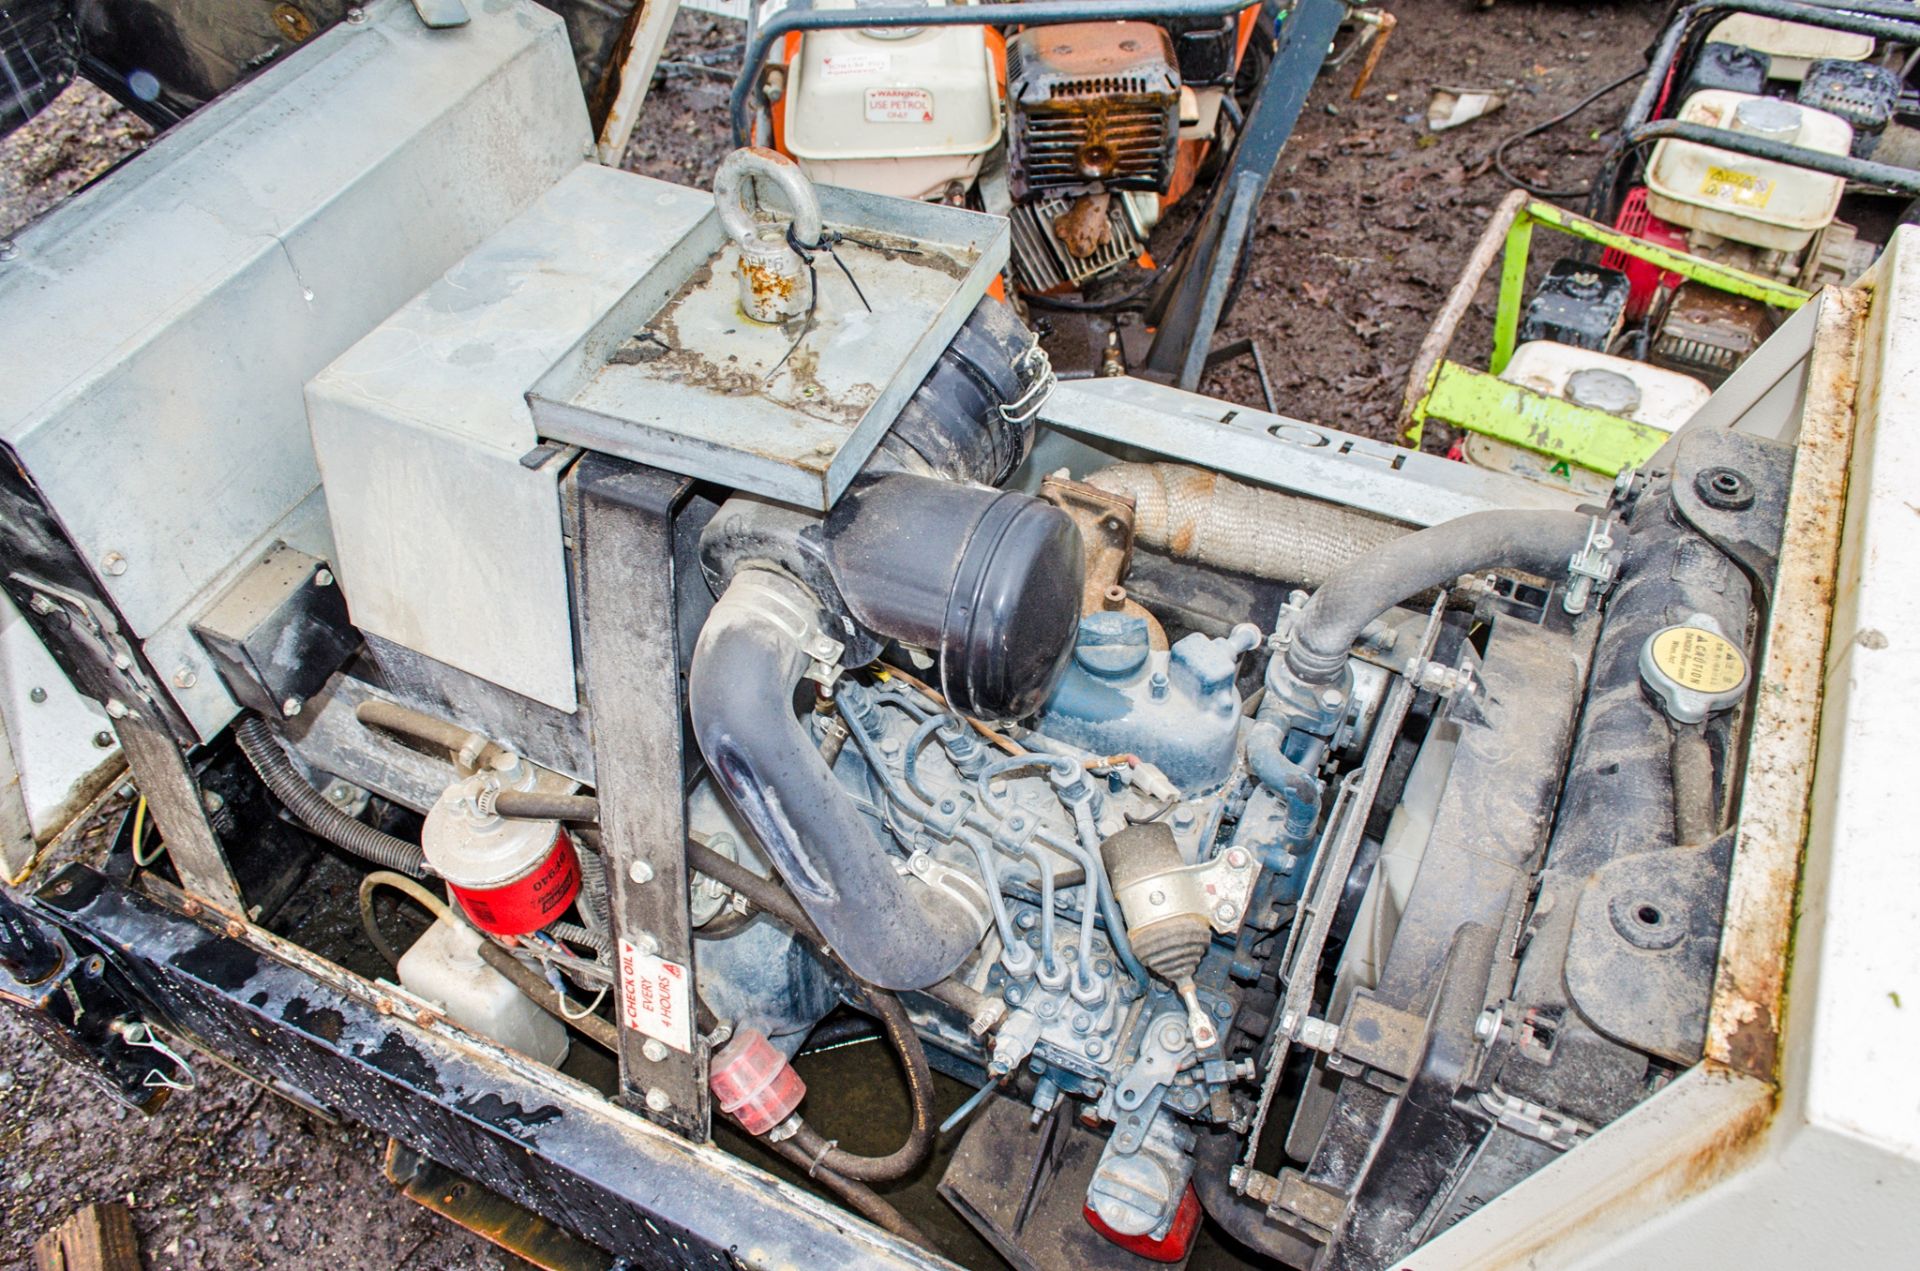 MHM ME 10000 10 kva diesel driven generator A741447 - Image 4 of 4